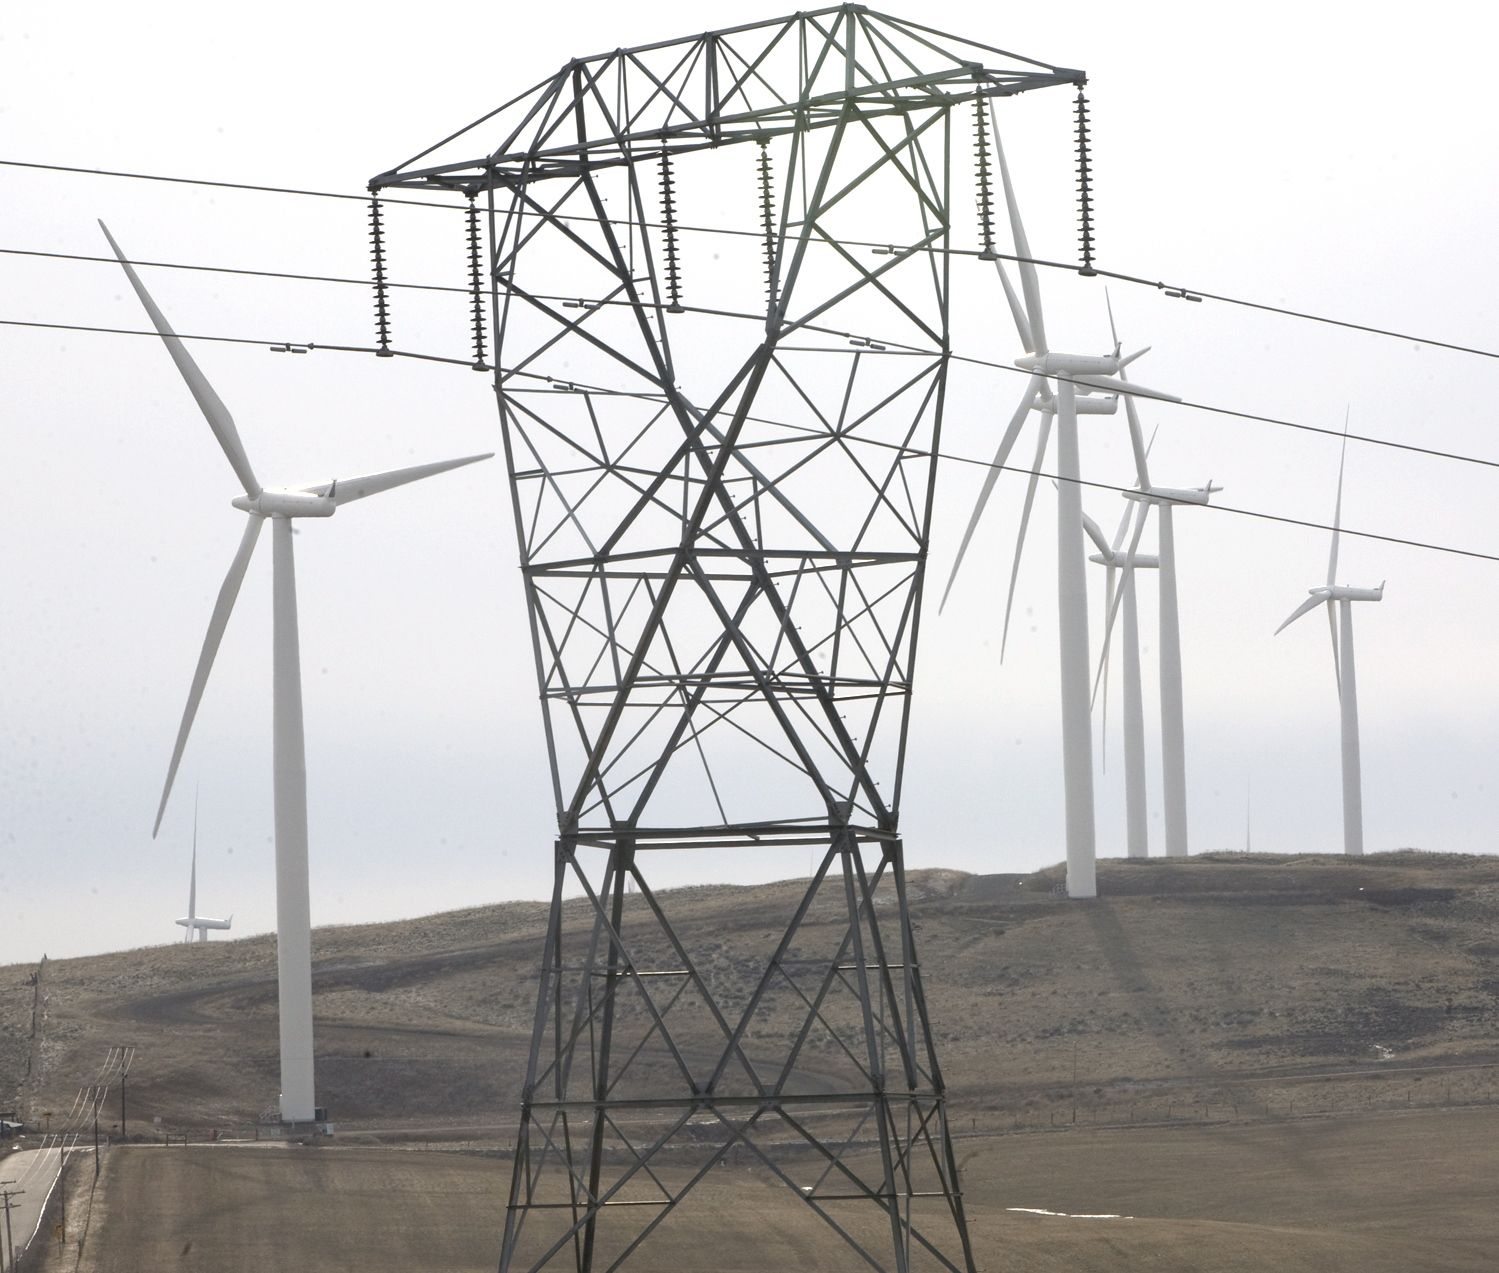 Power lines near Goldendale are at capacity because of power being generated by area wind turbines.